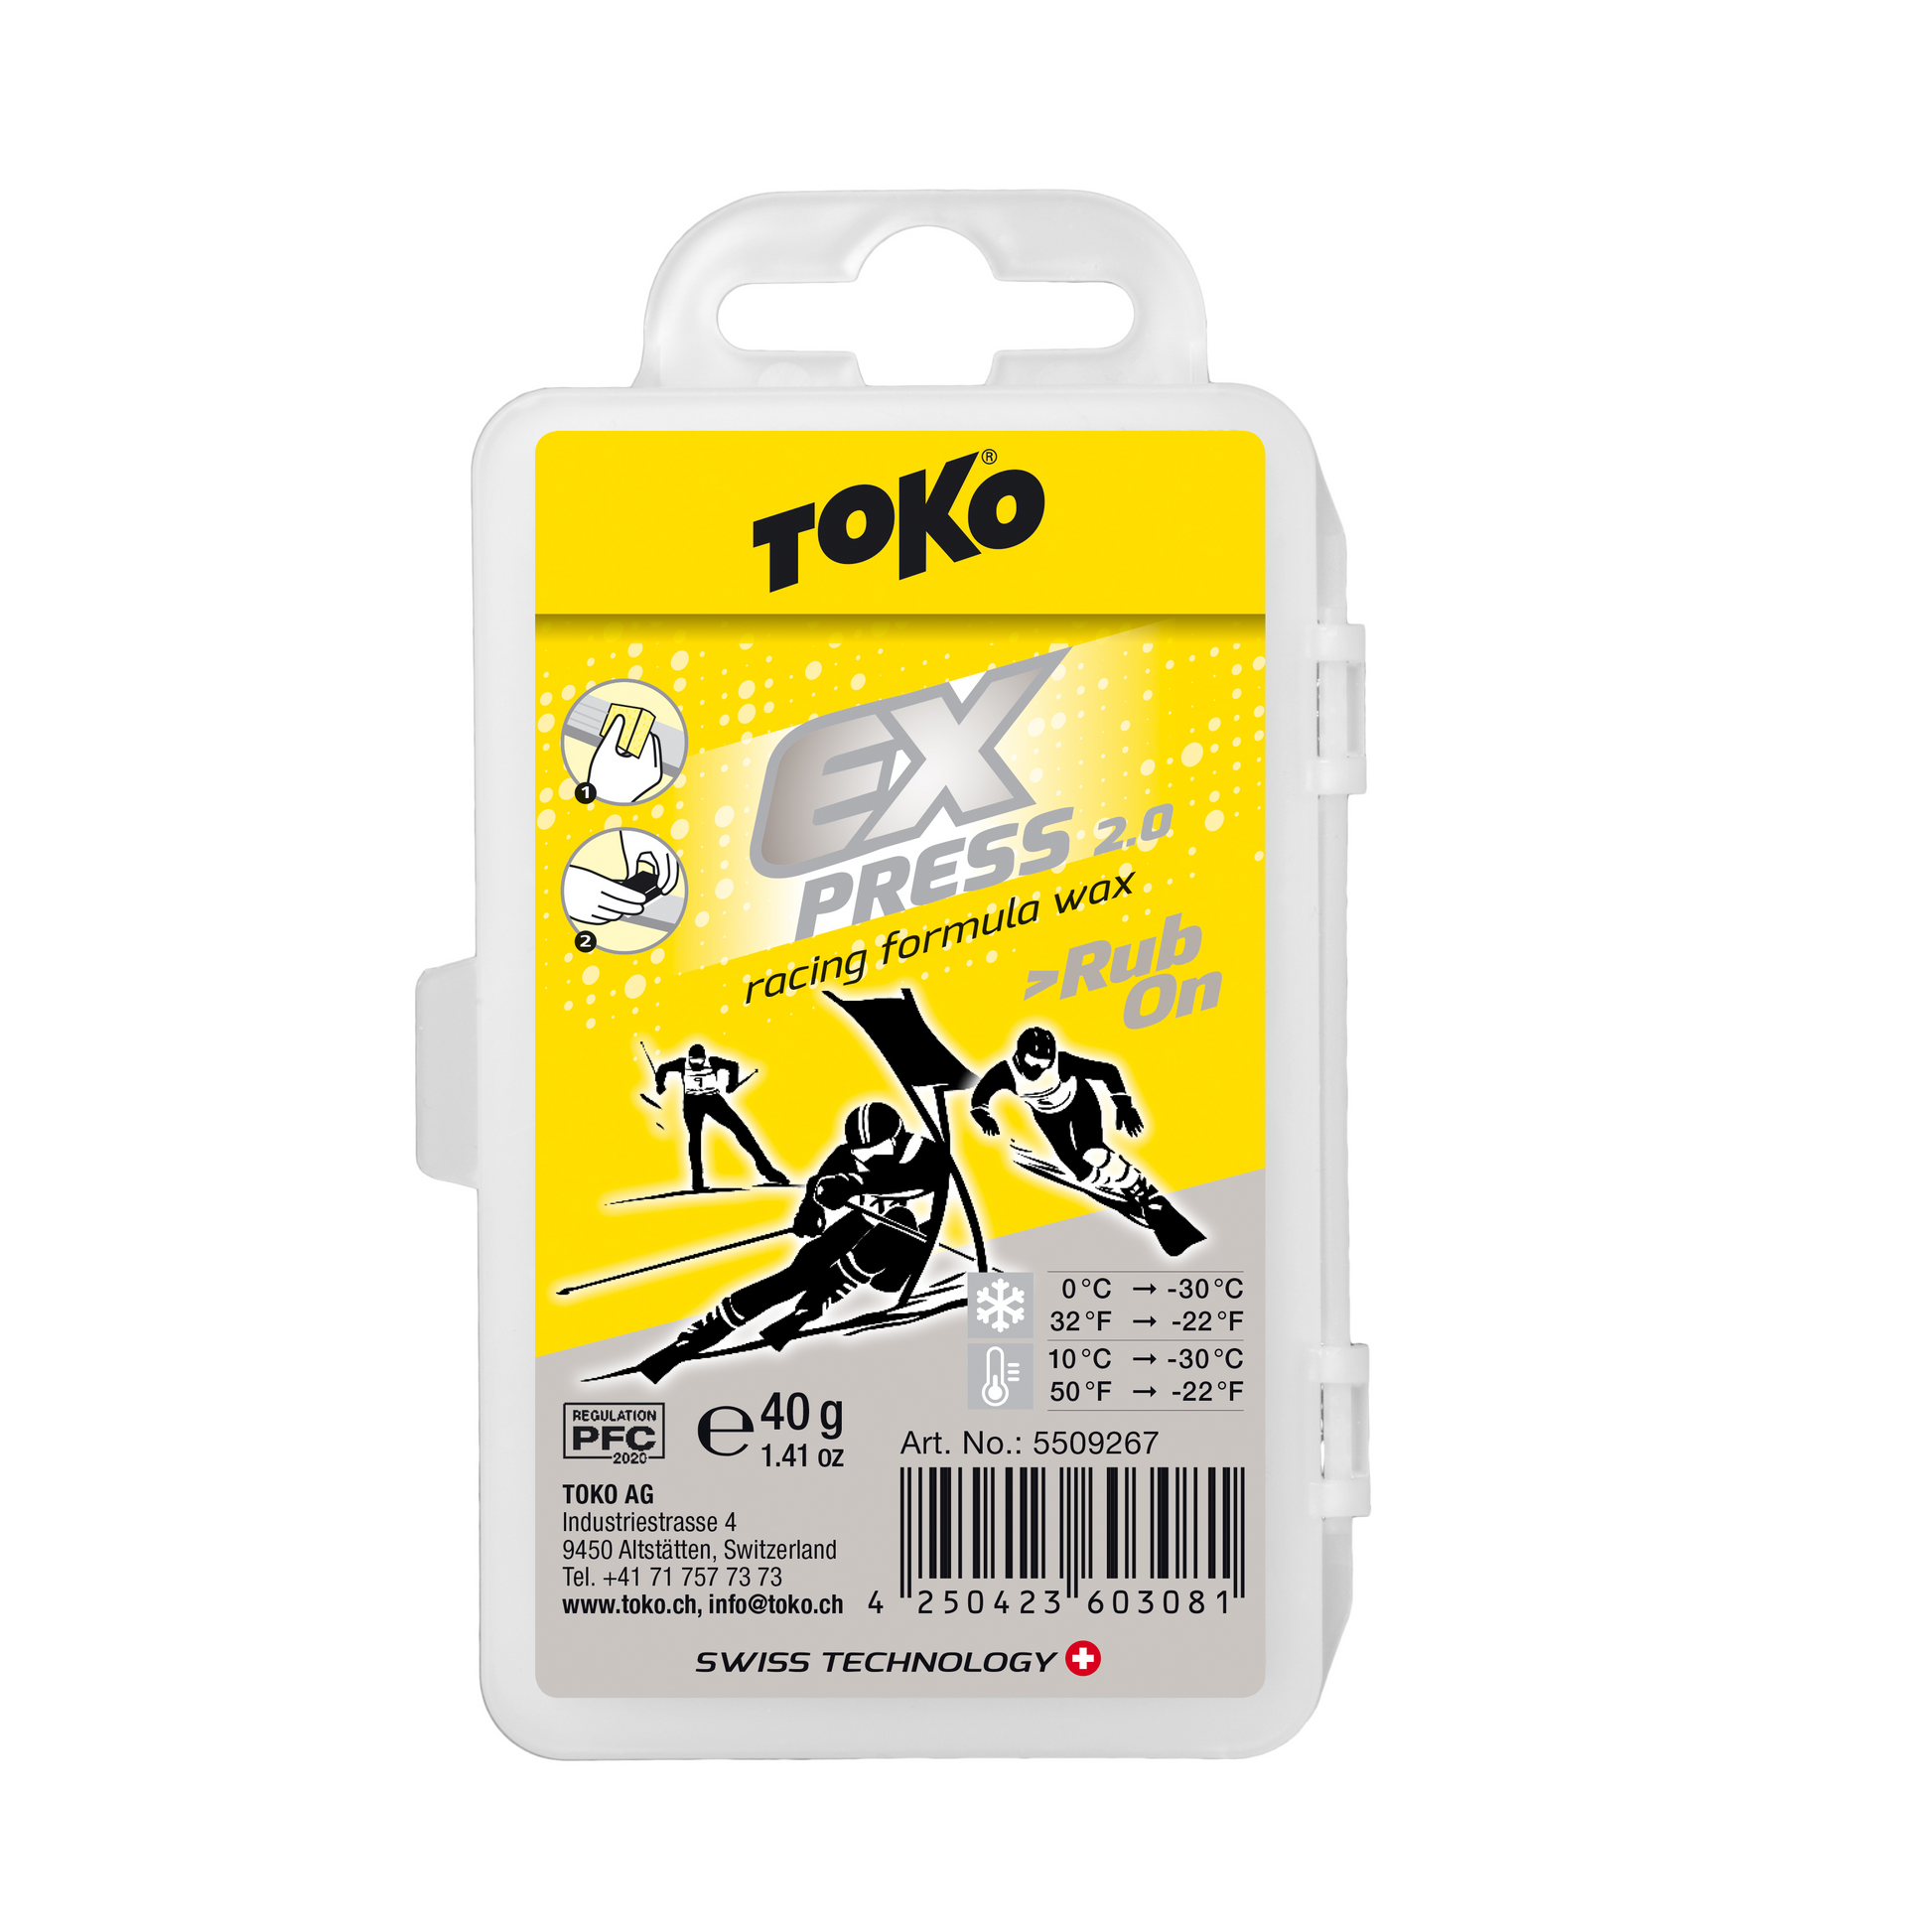 A product picture of the Toko Express Racing Rub-on